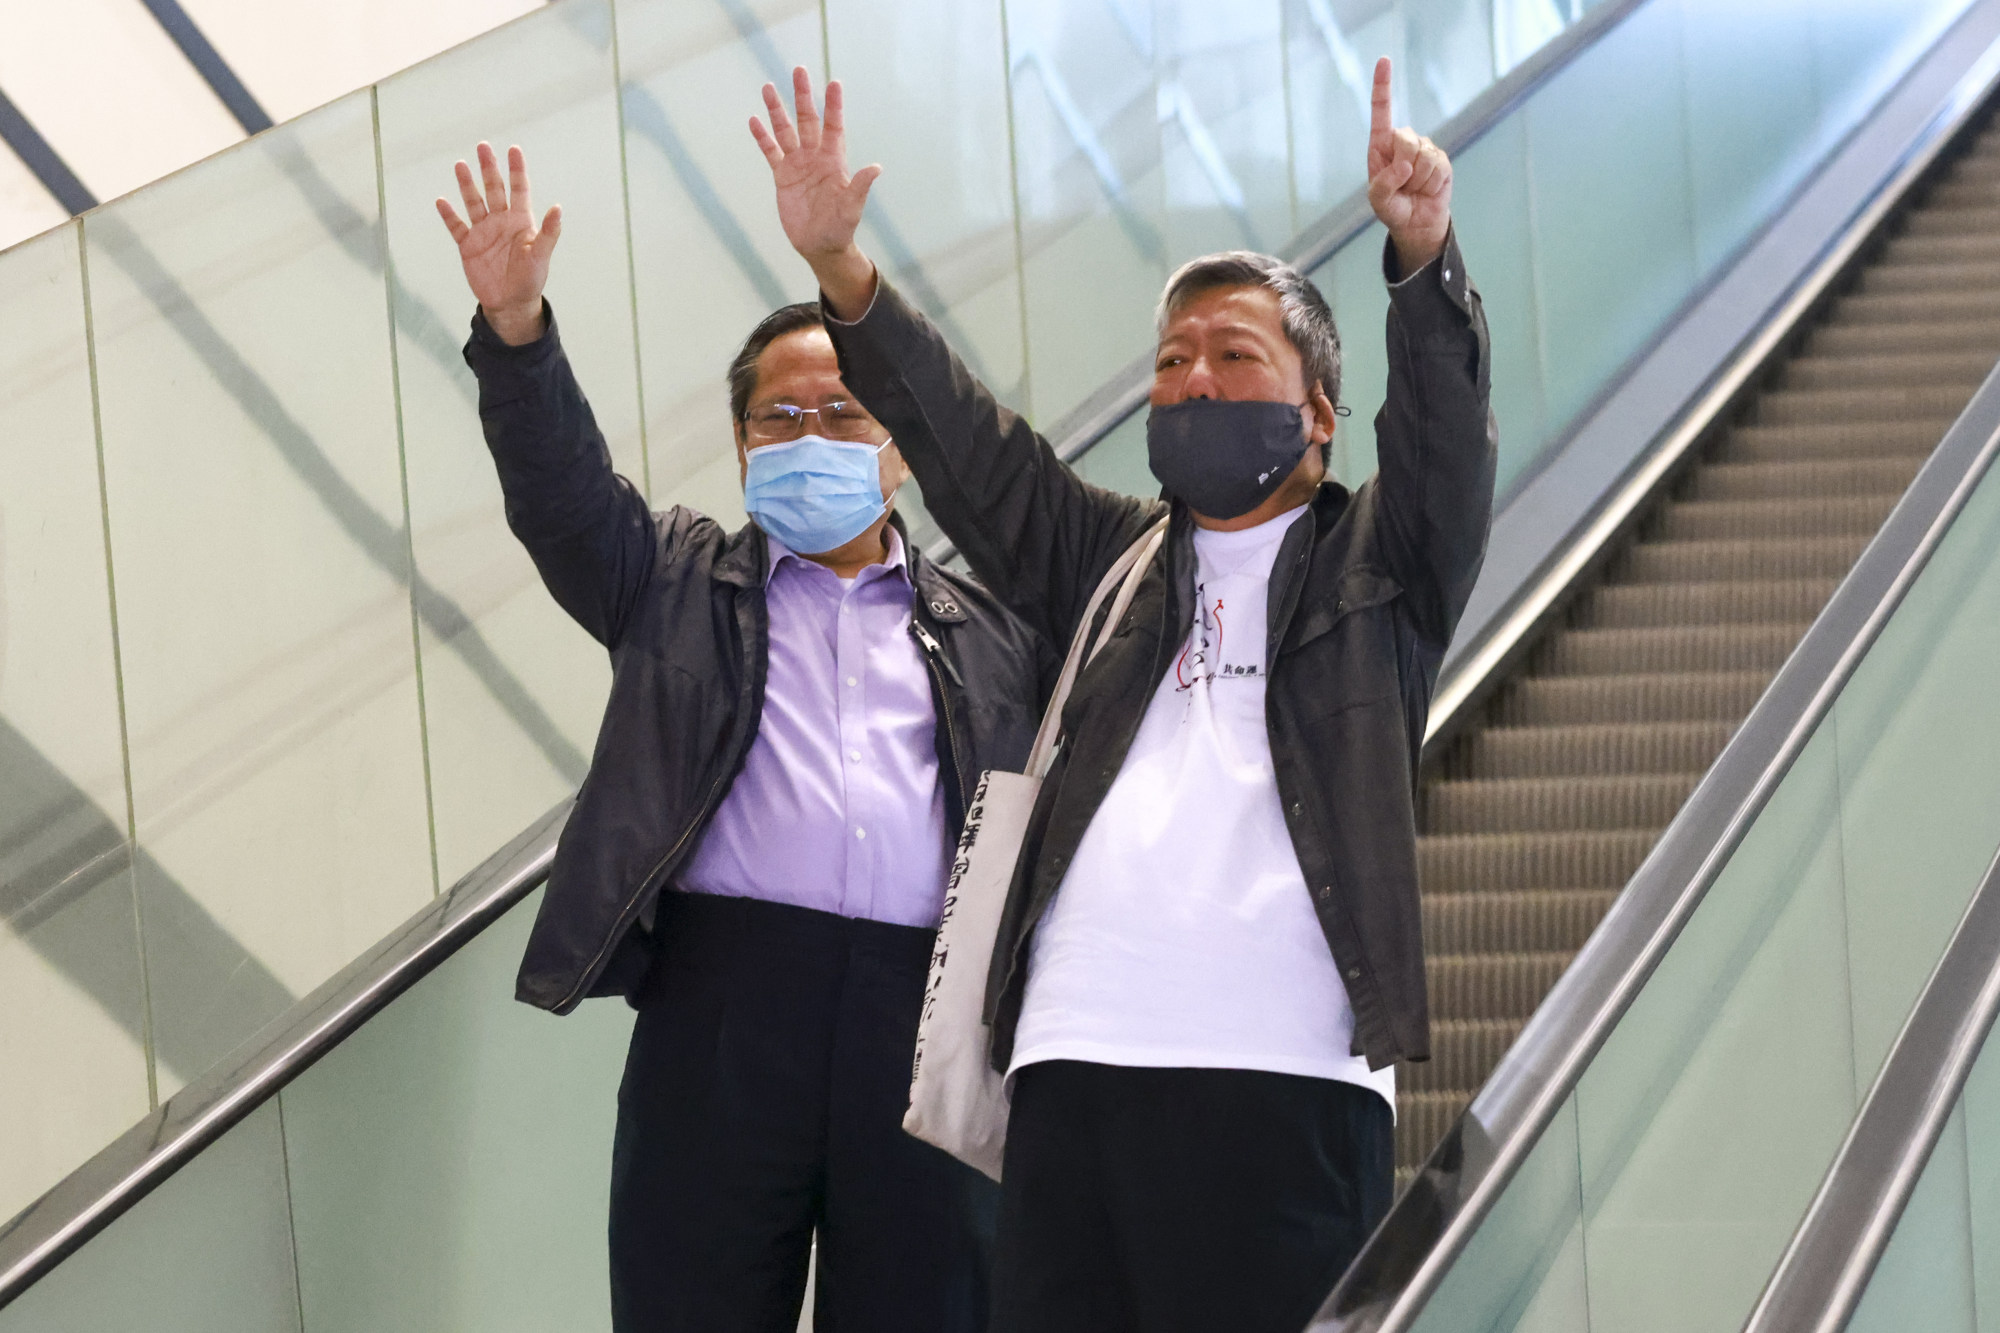 Former lawmakers Albert Ho (left) and Lee Cheuk-yan, who are among the seven opposition figures, outside West Kowloon Court in 2019. Photo: May Tse